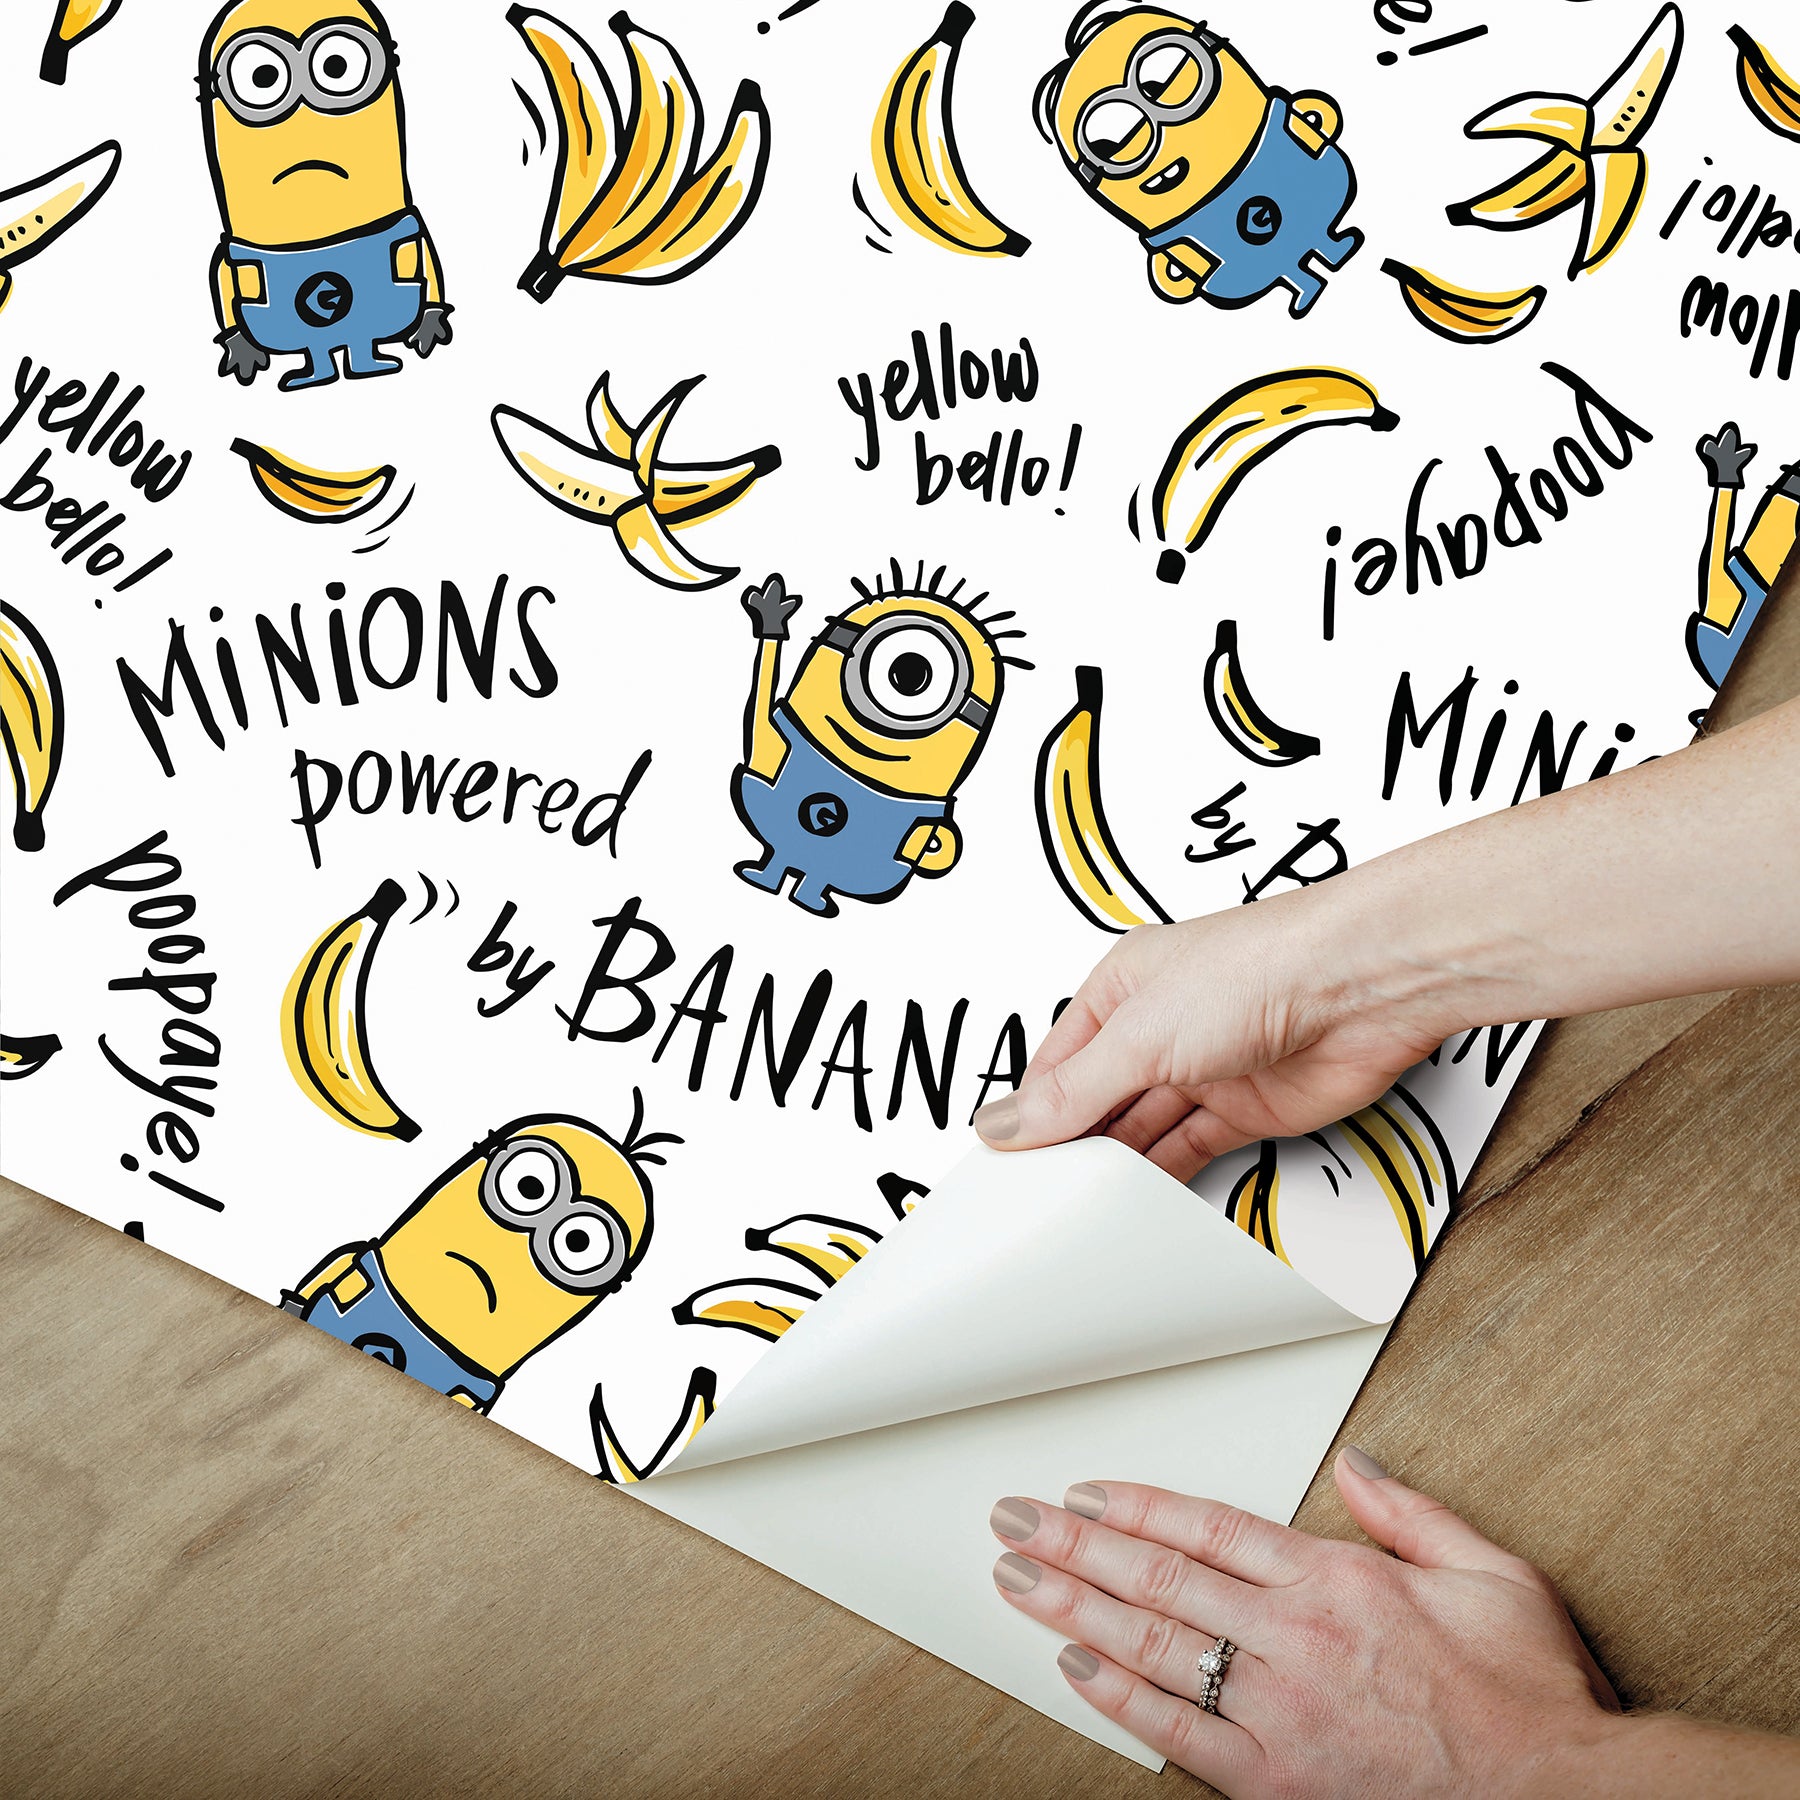 Minions Powered by Bananas Peel and Stick Wallpaper Peel and Stick Wallpaper RoomMates Decor   